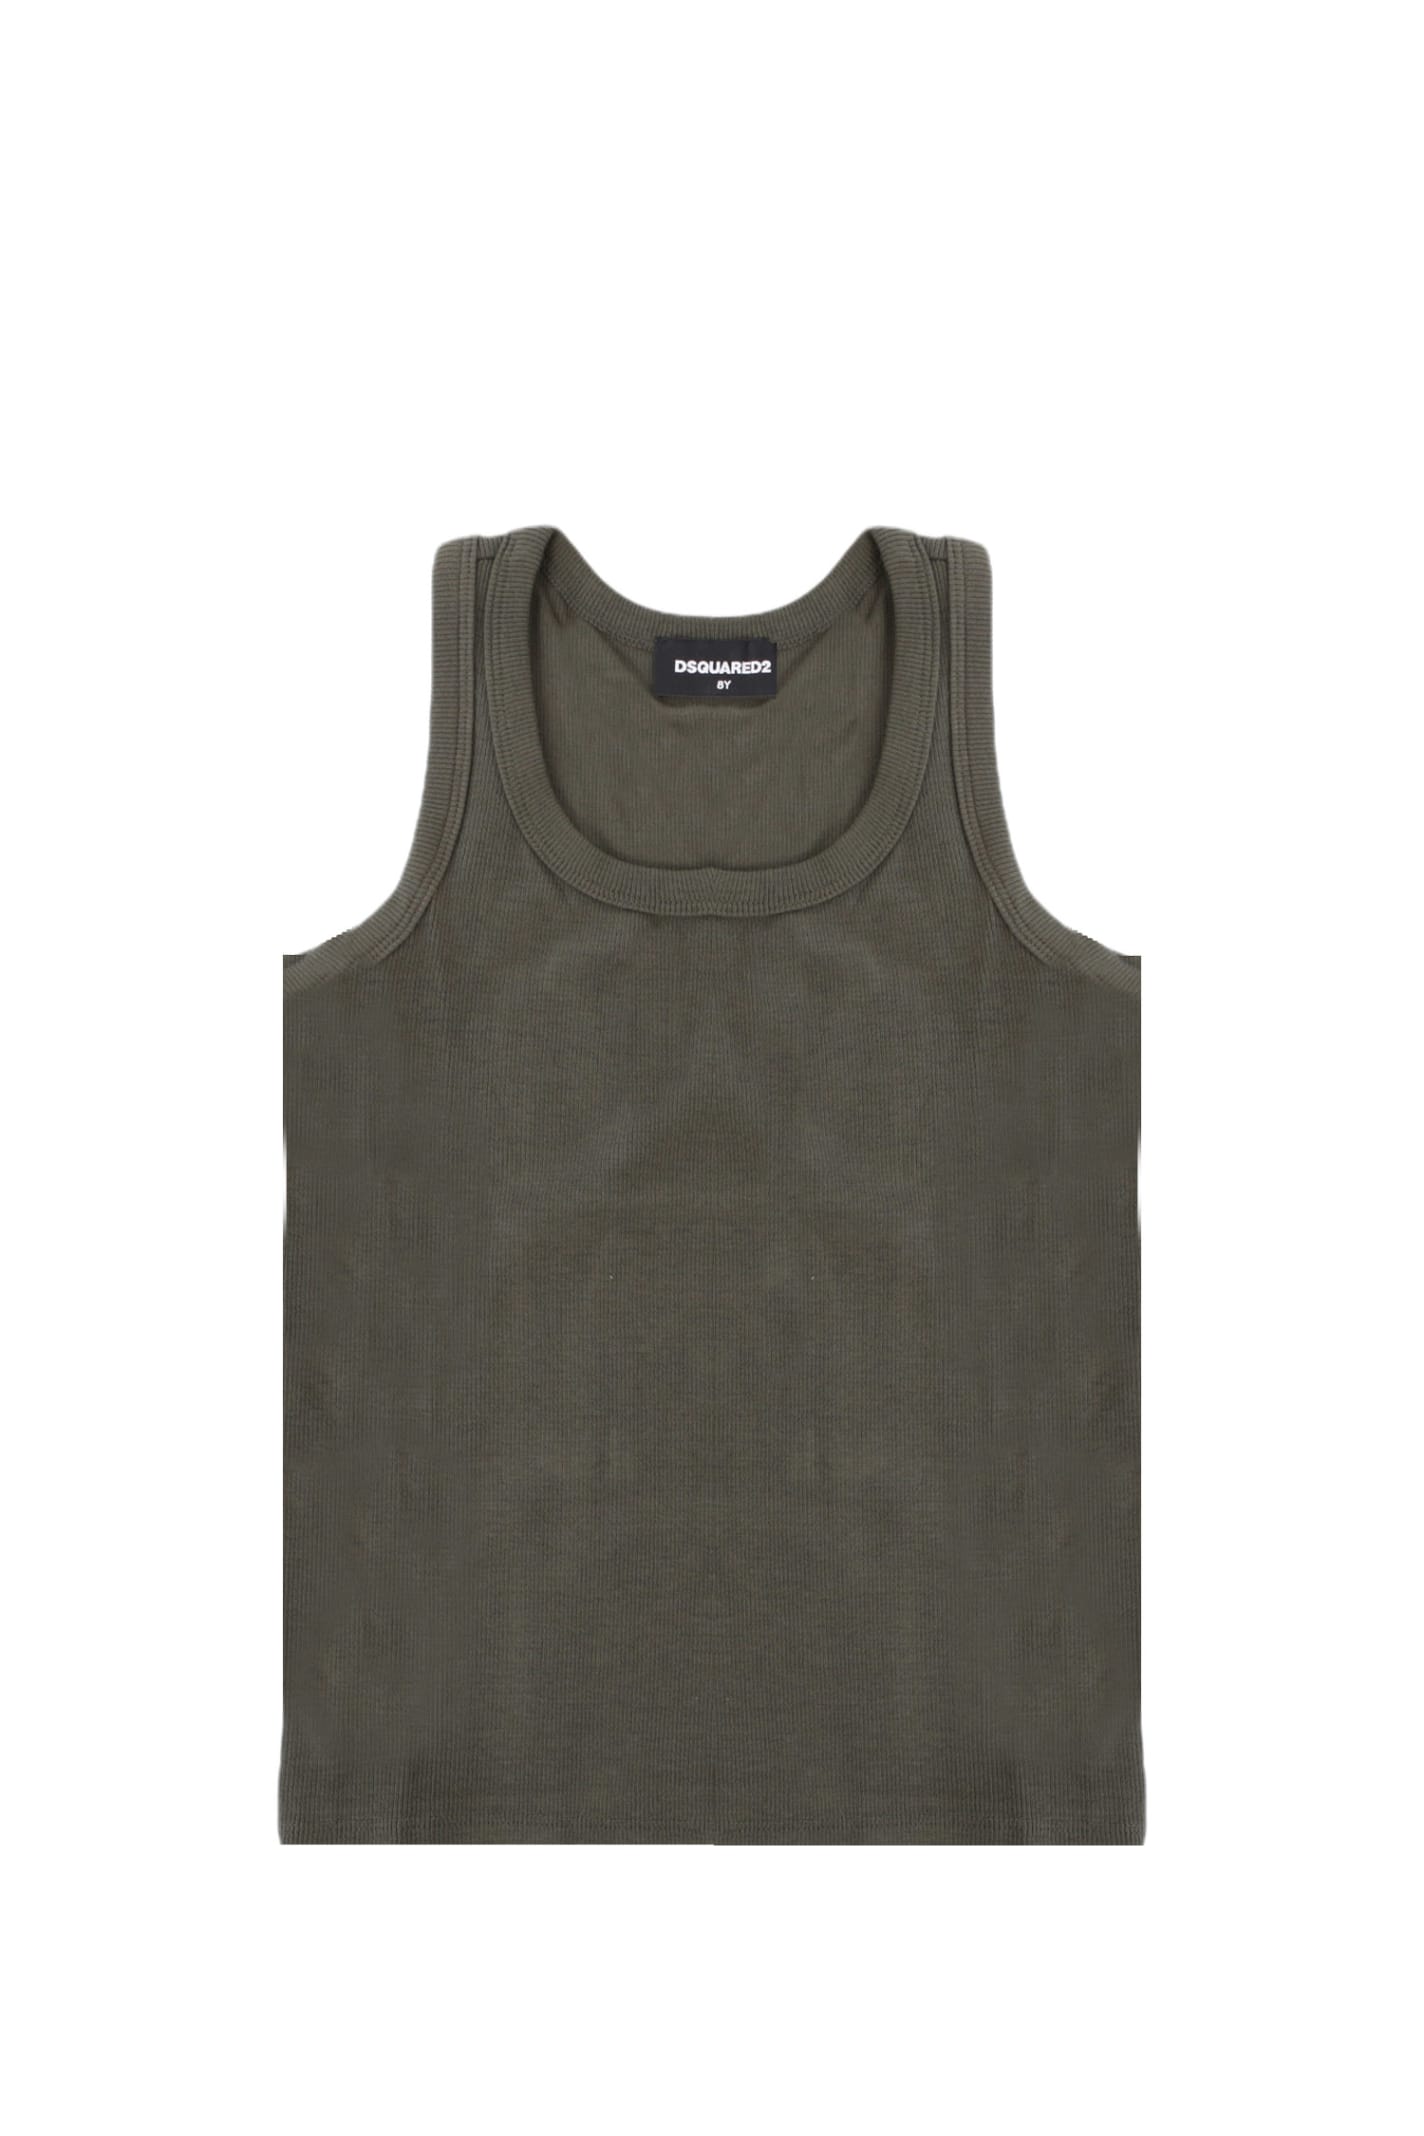 Dsquared2 Cotton Tank Top - Green - male - Size: 12